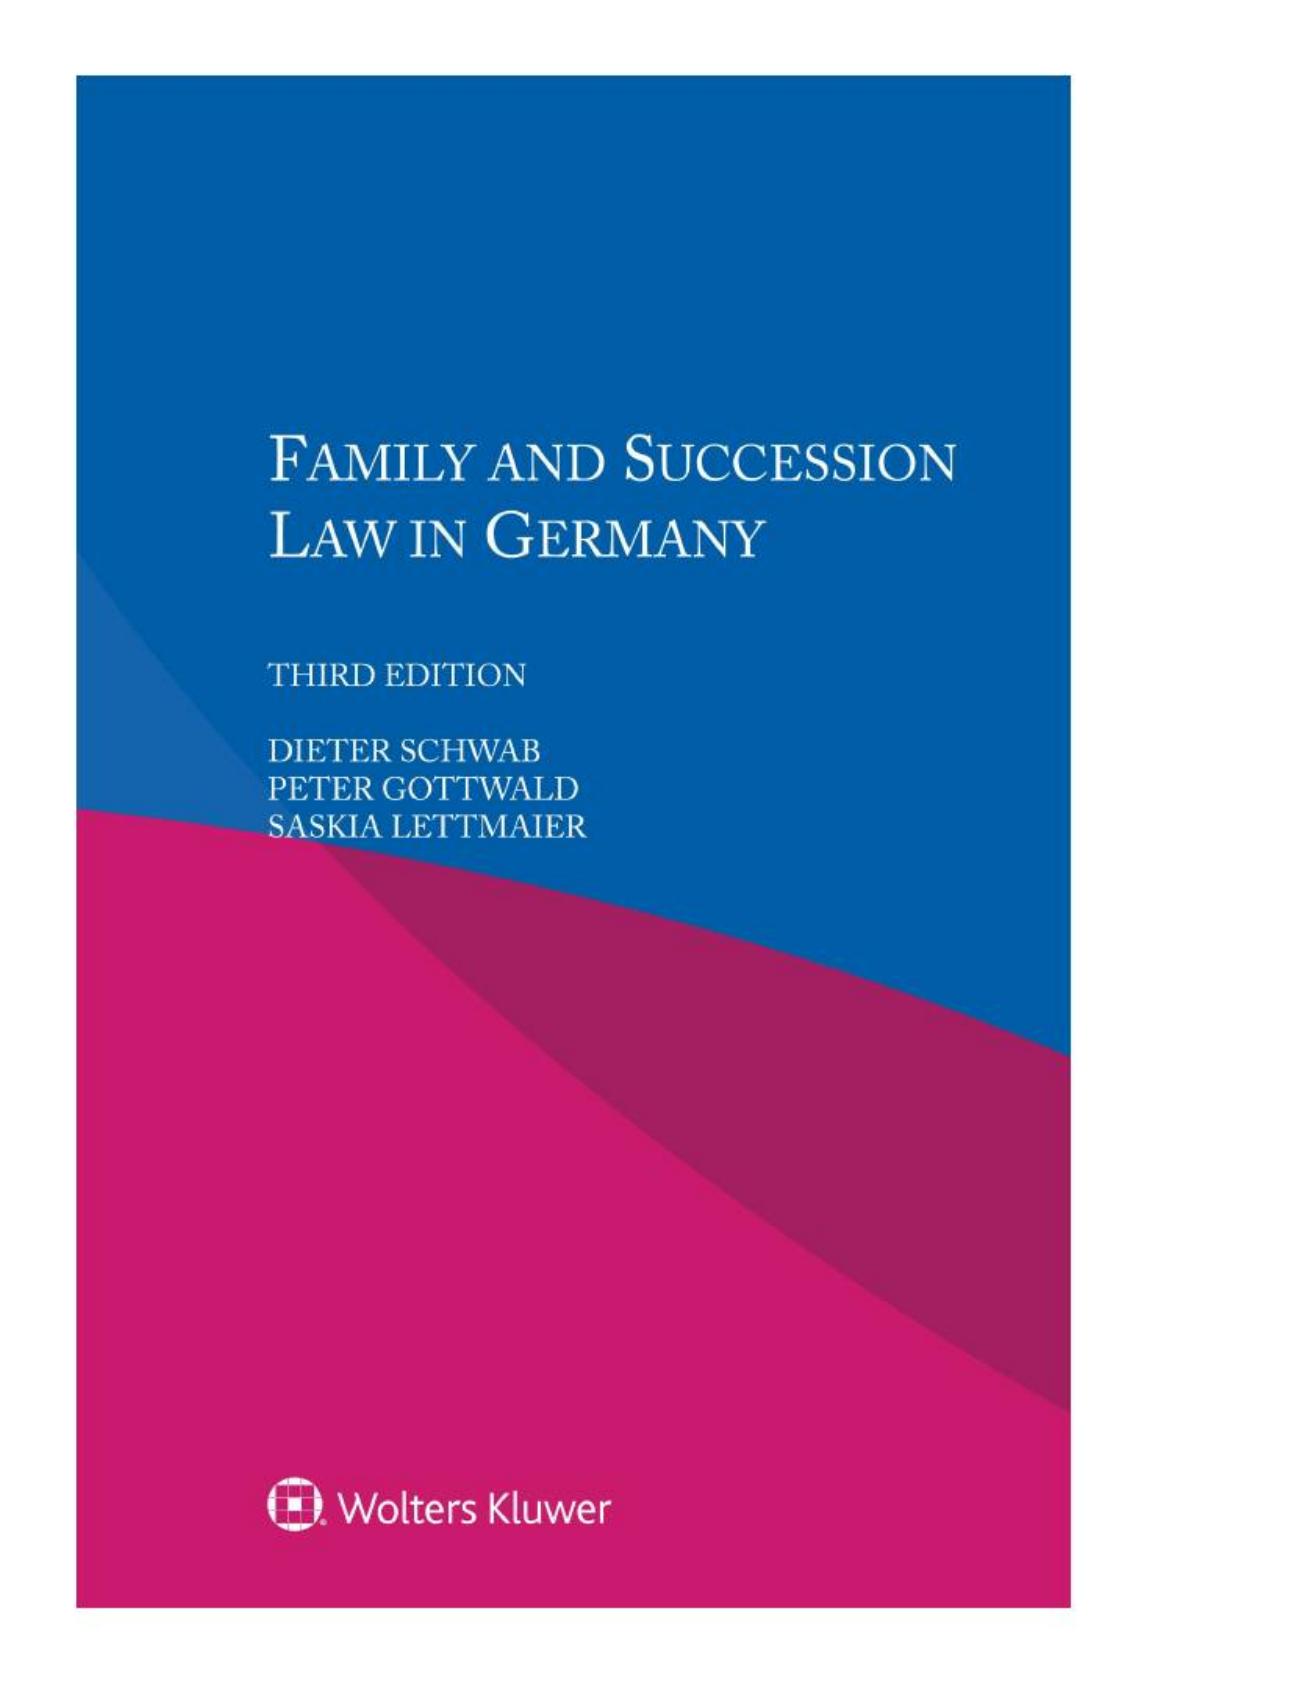 (eBook PDF)Family and Succession Law in Germany  by Dieter Schwab , Peter Gottwald (Author